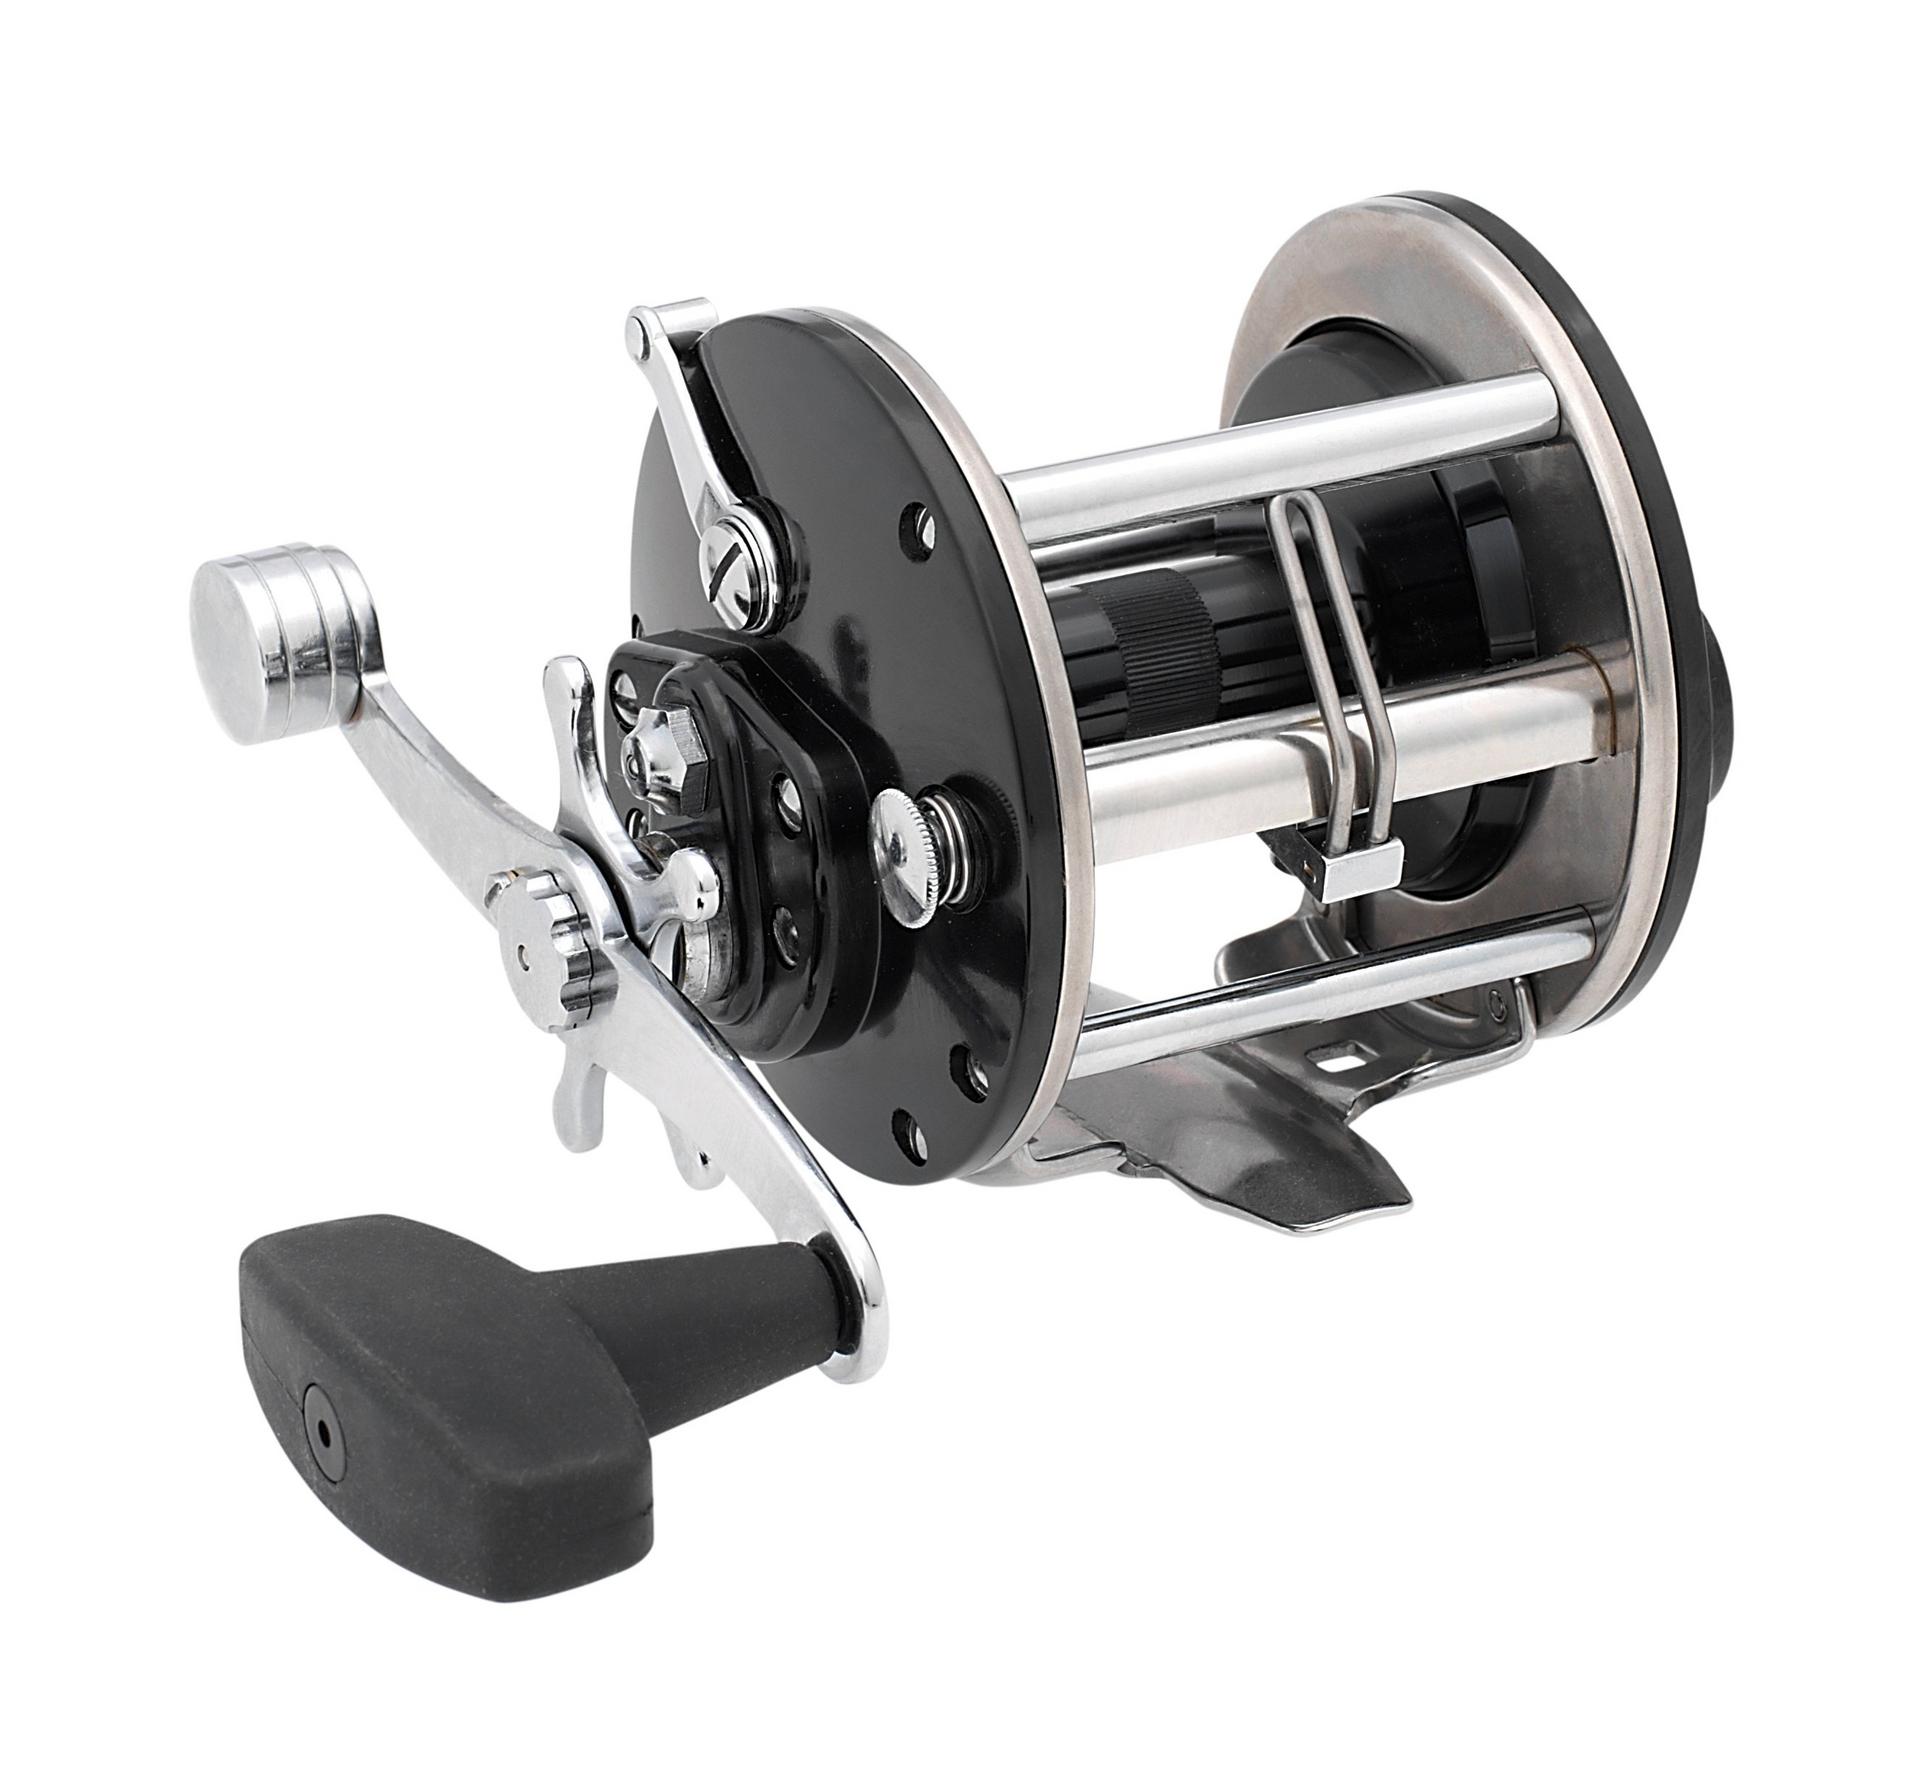 Penn SQL30LW2050C66 Squall Levelwind Saltwater Trolling Fishing Reel & Rod  Combo, 1 Piece - Pick 'n Save